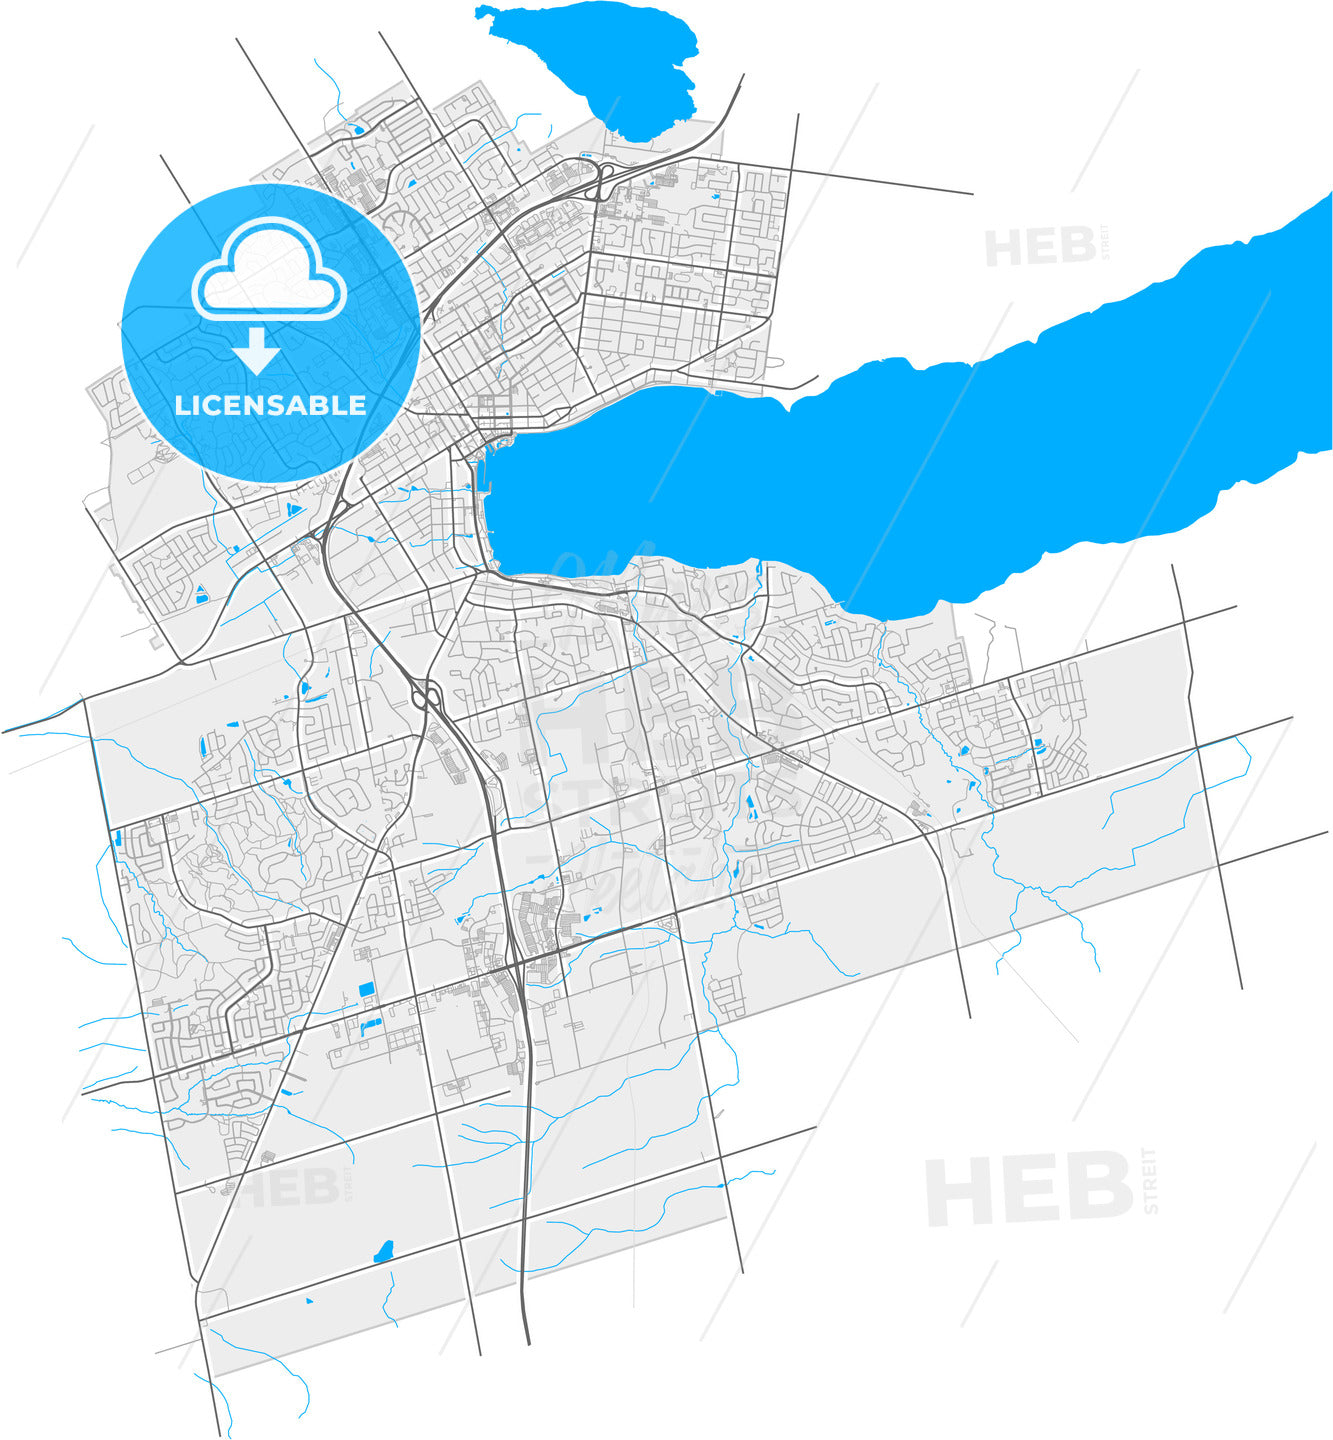 Barrie, Ontario, Canada, high quality vector map